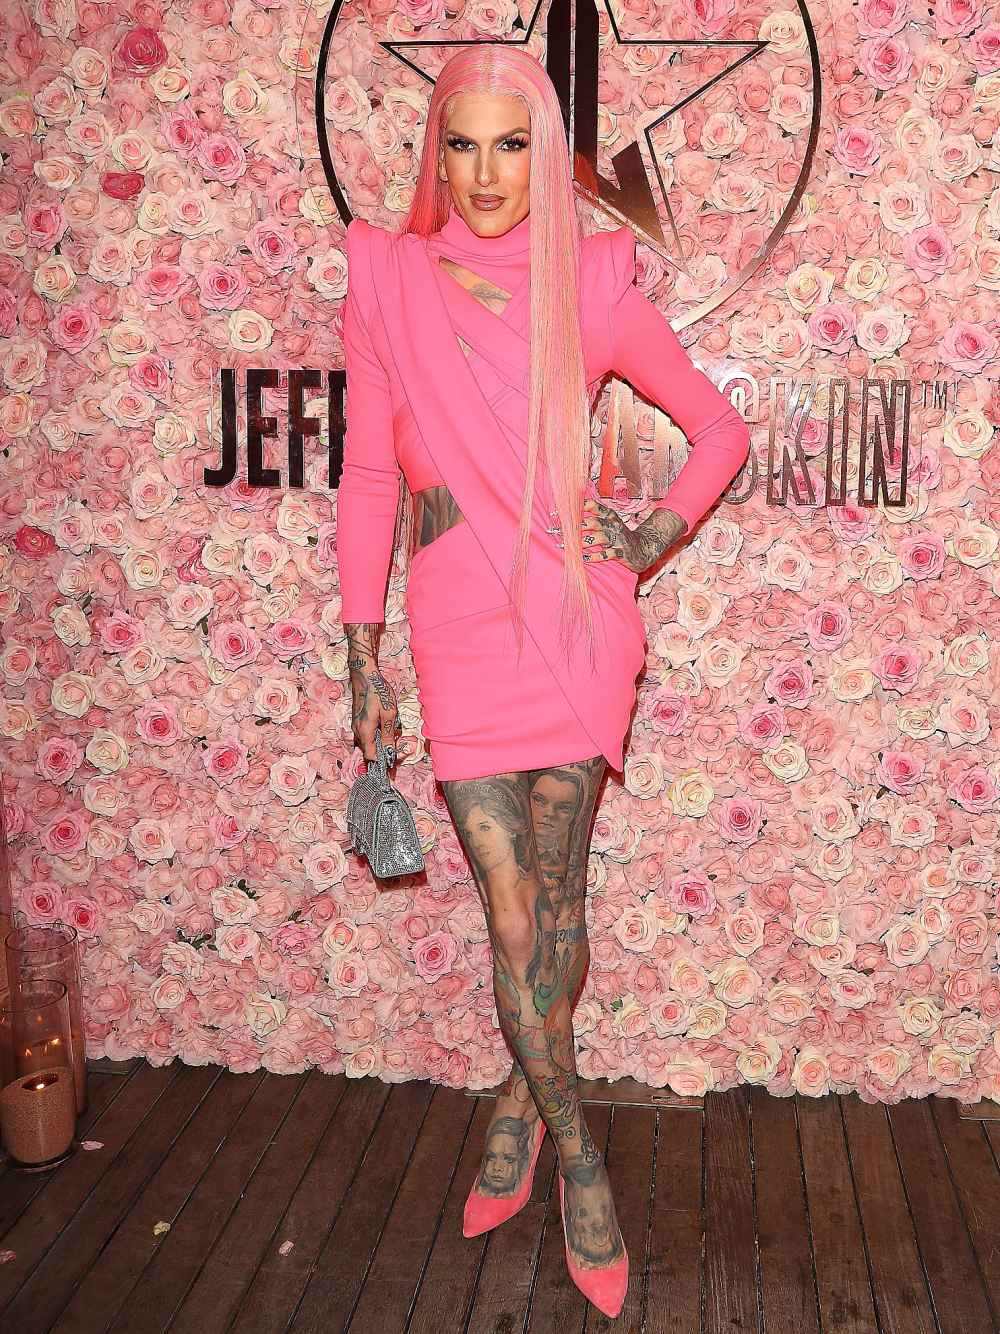 Jeffree Star Launches 7-Product Skincare Line